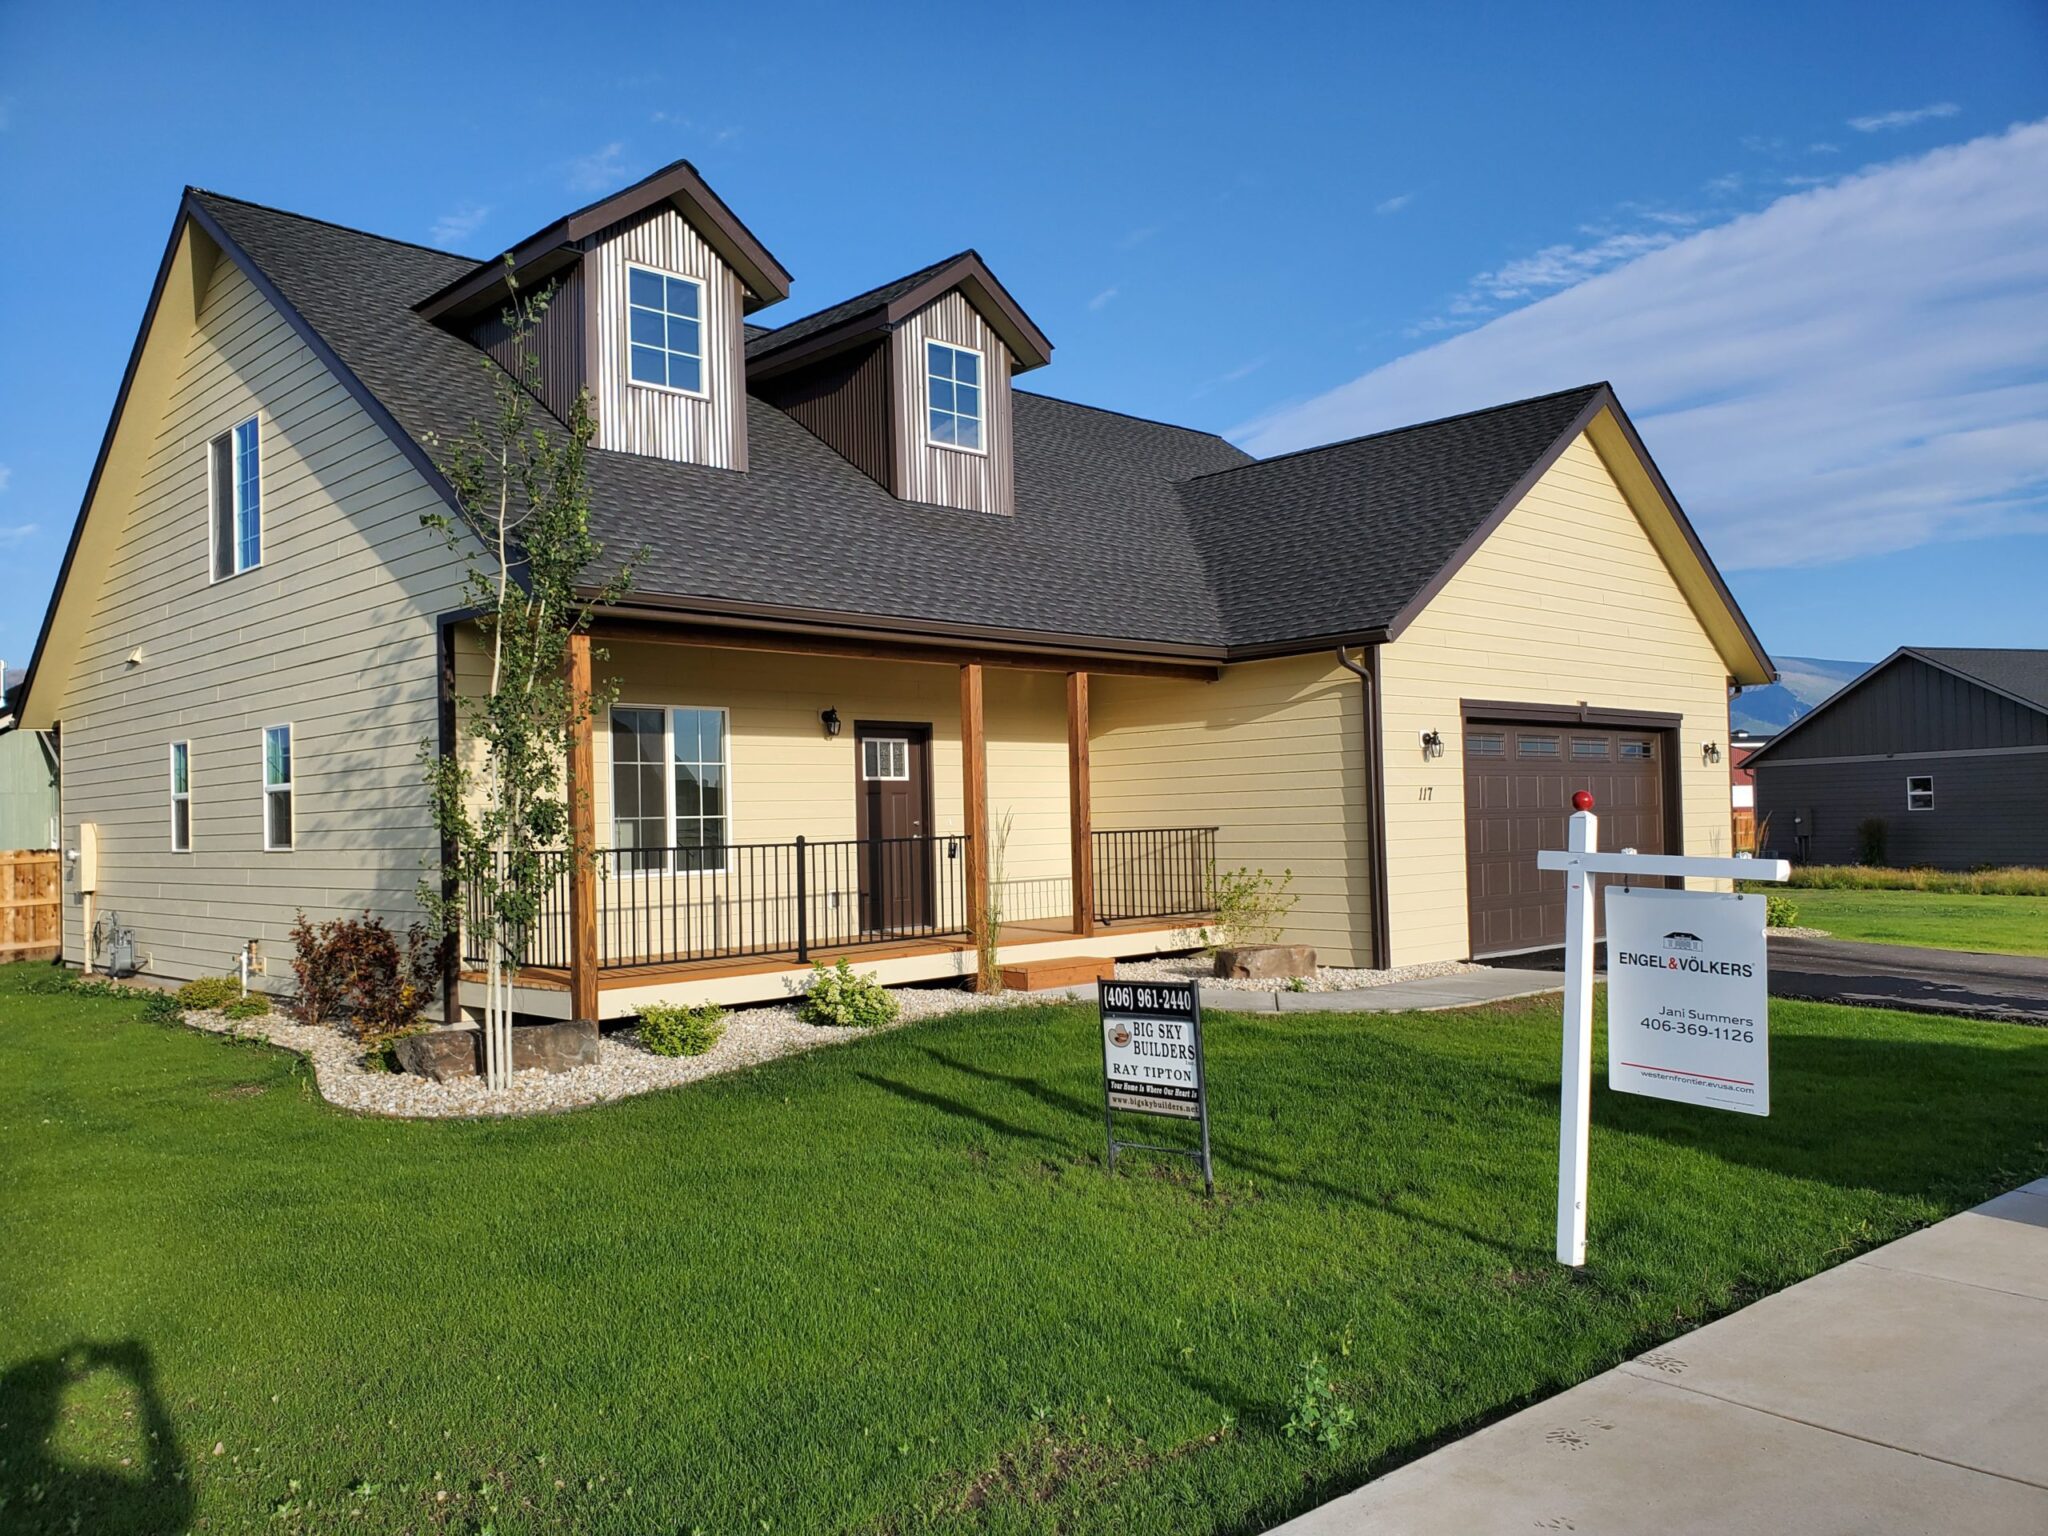 Front exterior of the Country Cottage model home - built by Big Sky Builders in Hamilton, MT